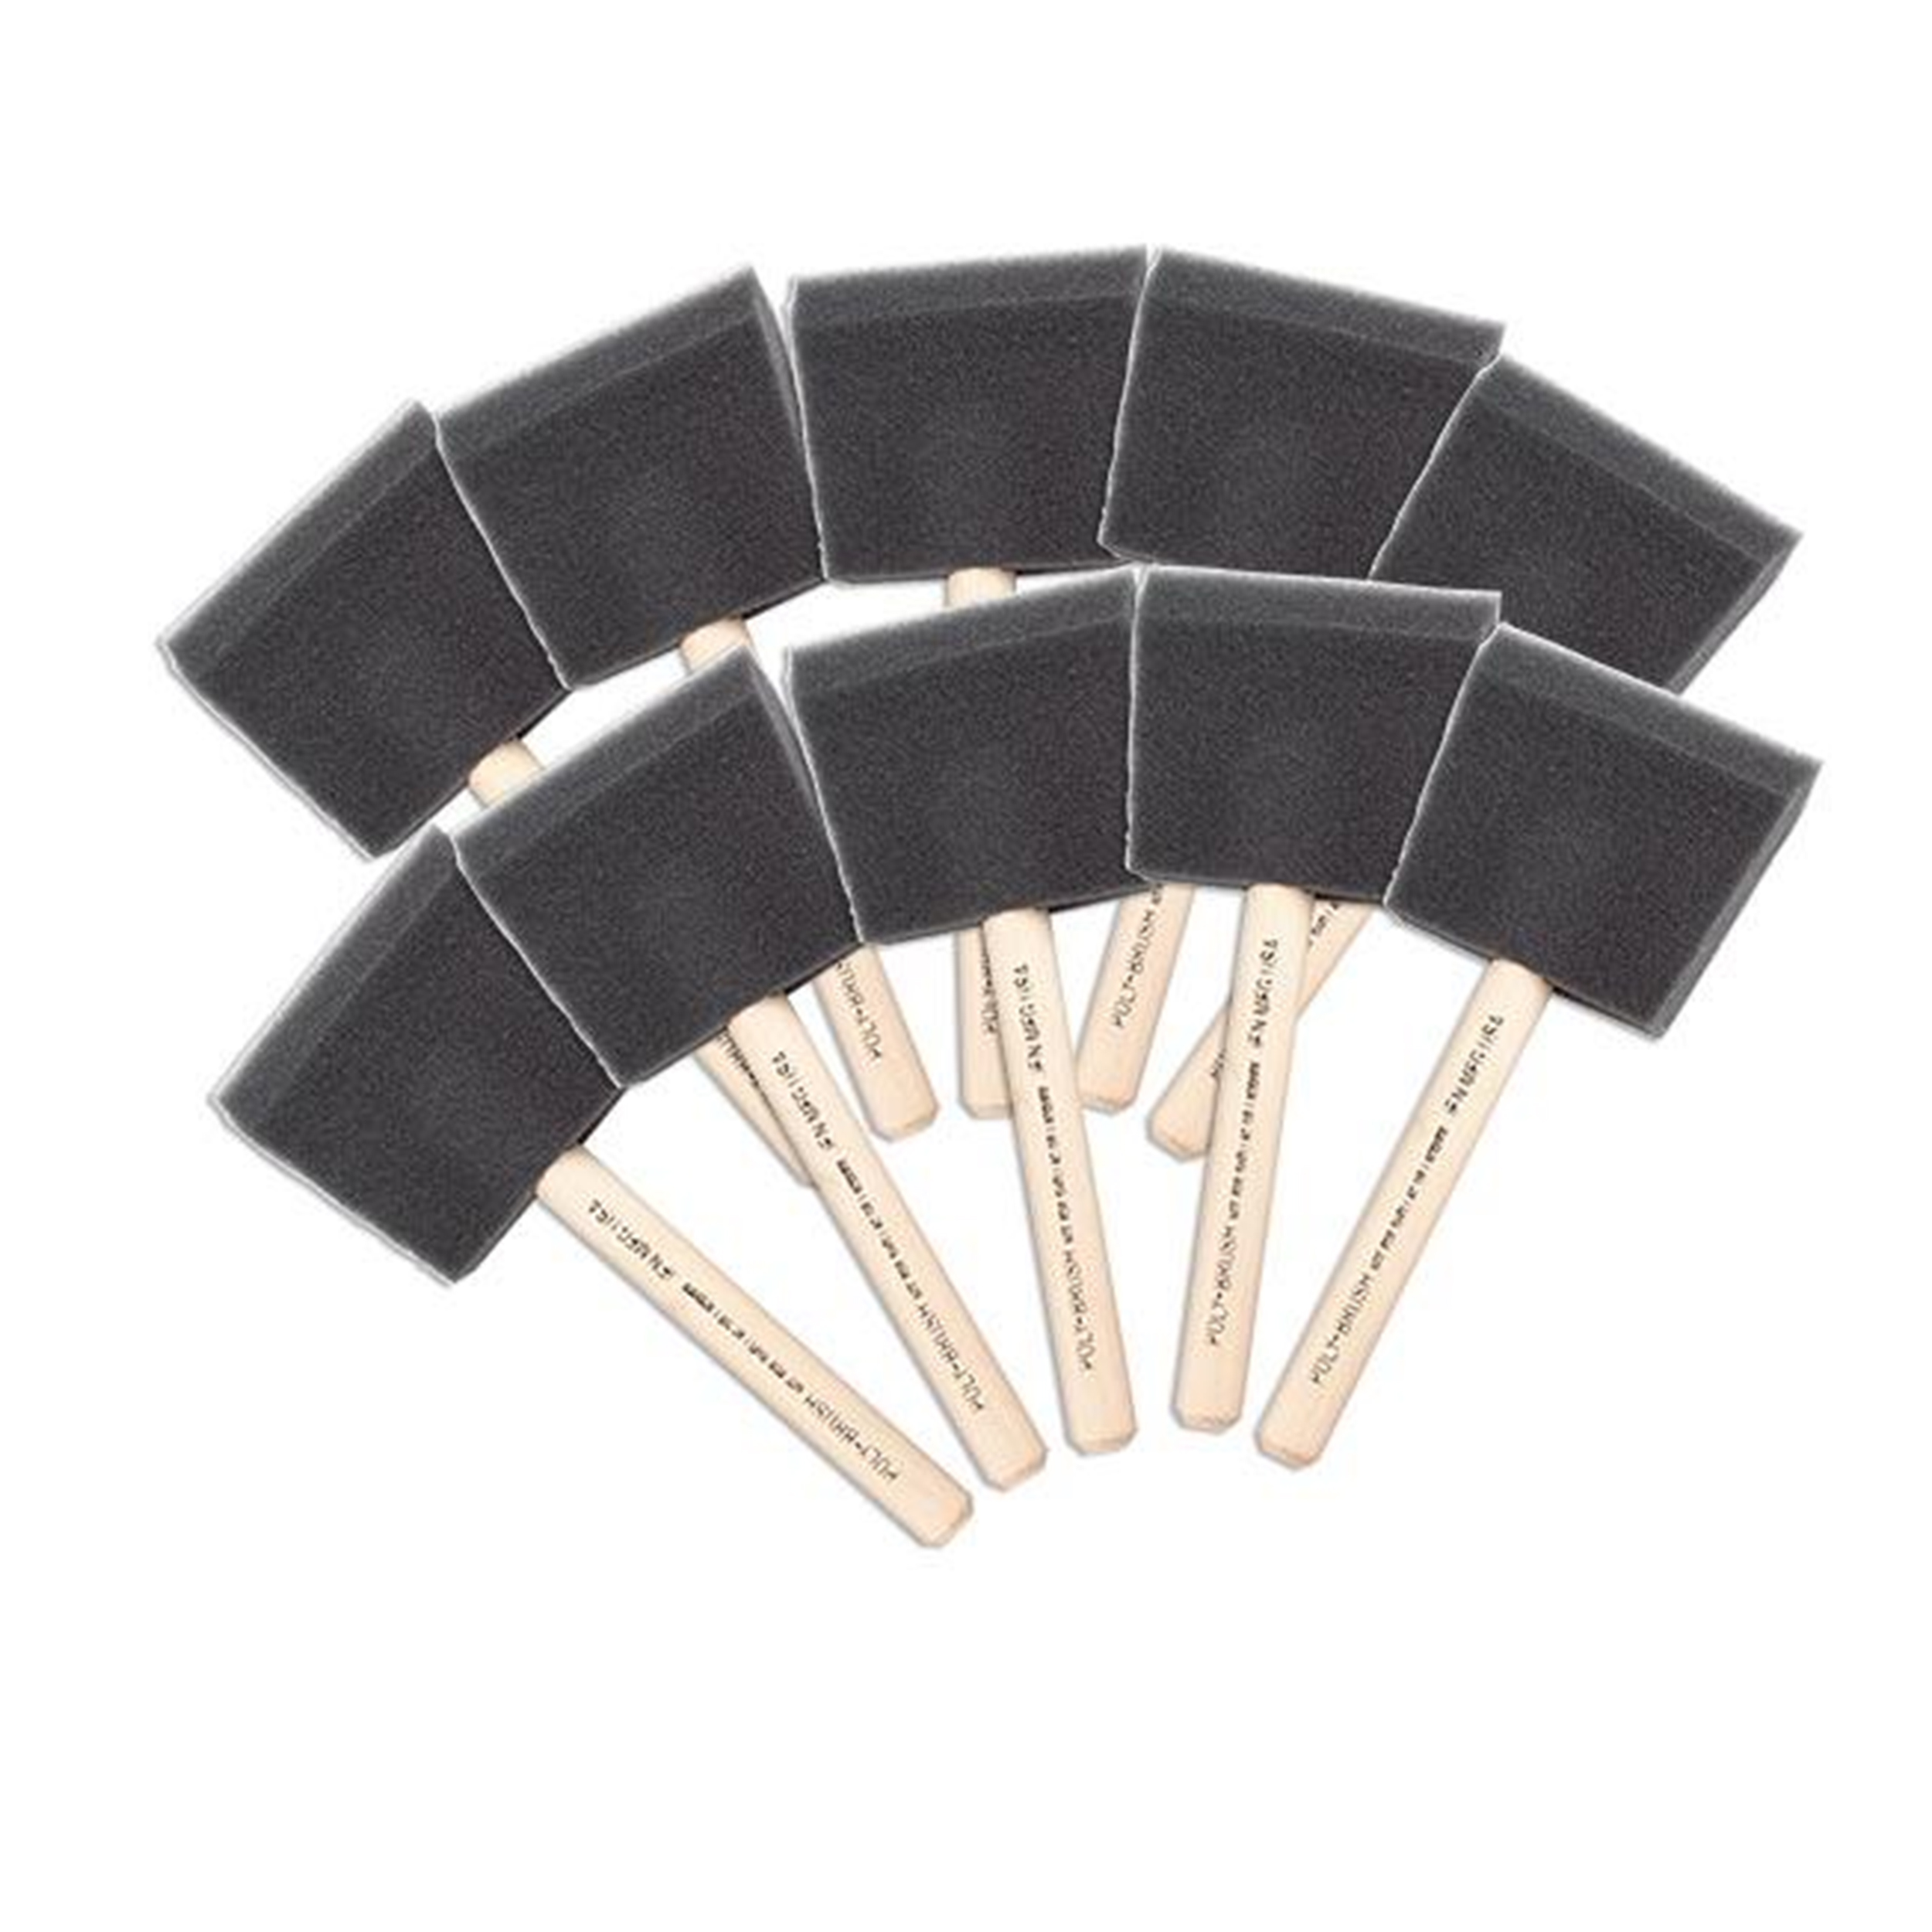 4" Wooden Handle Foam Brushes, 10-pack